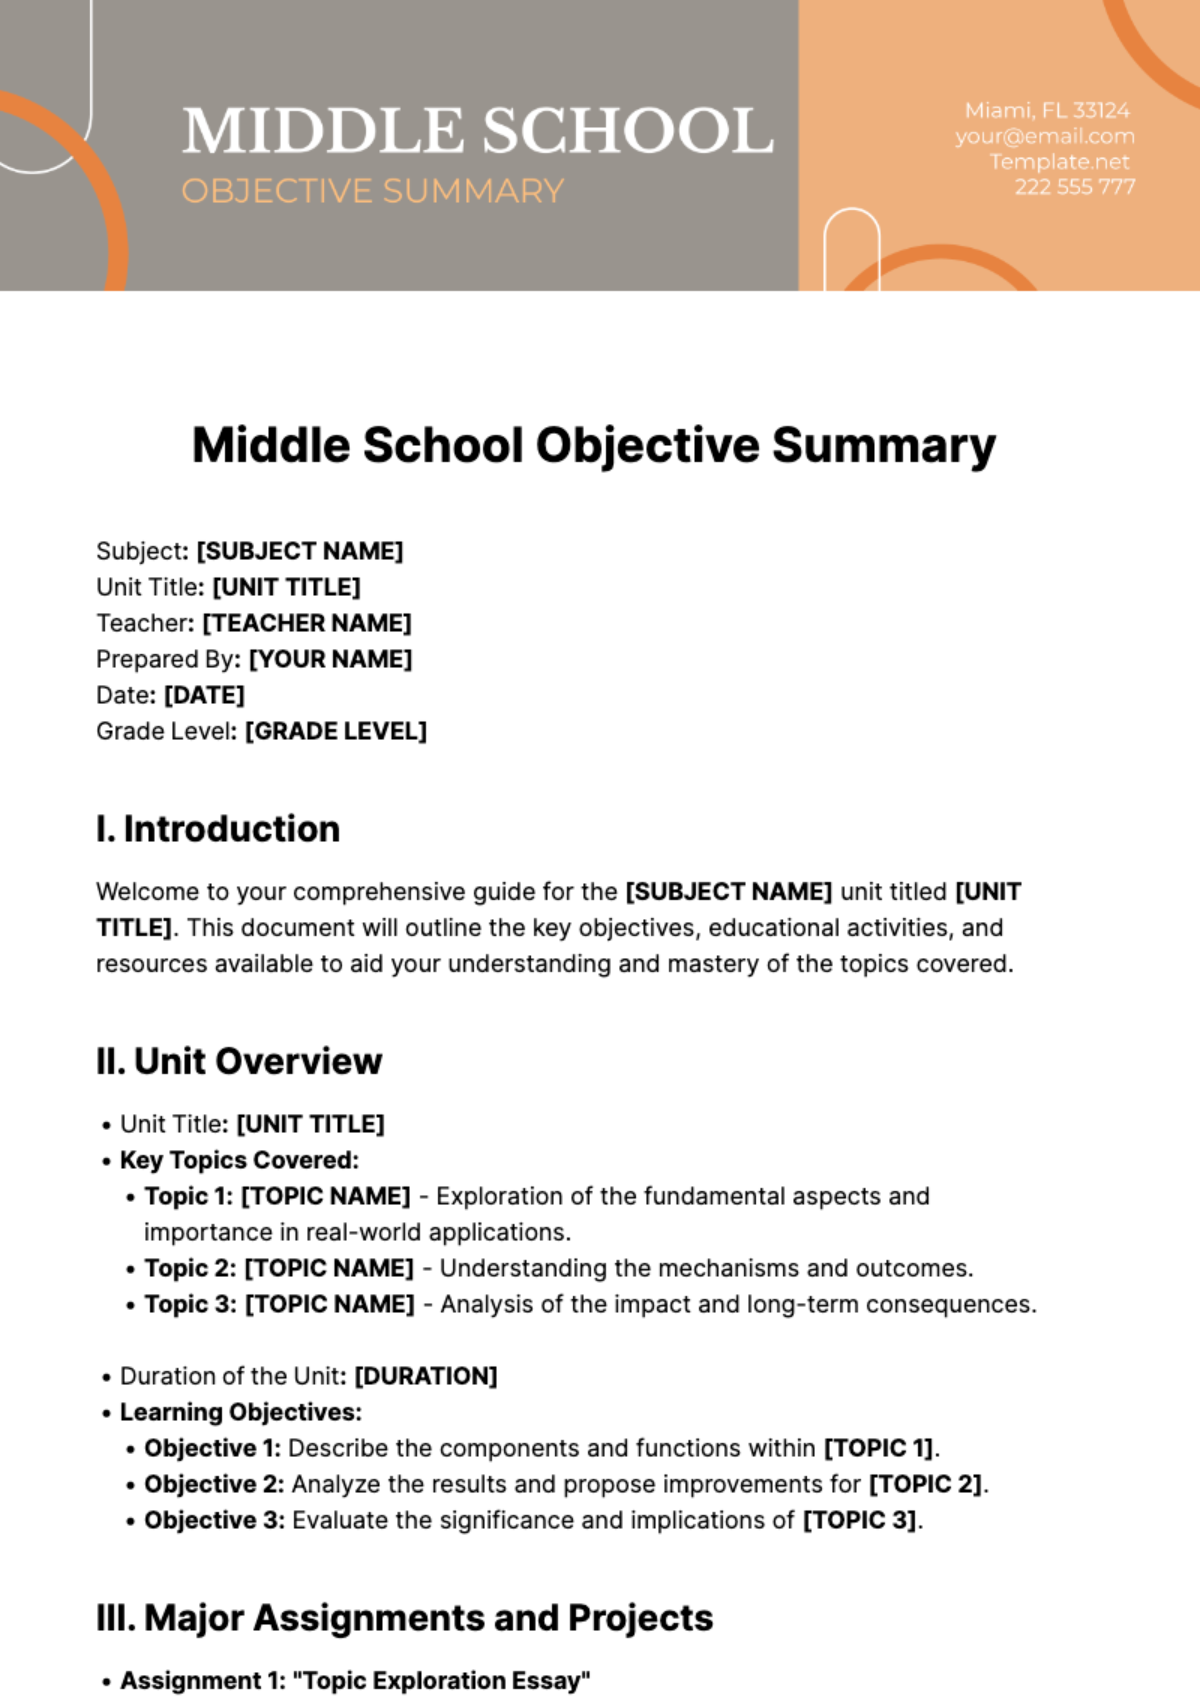 Middle School Objective Summary Template